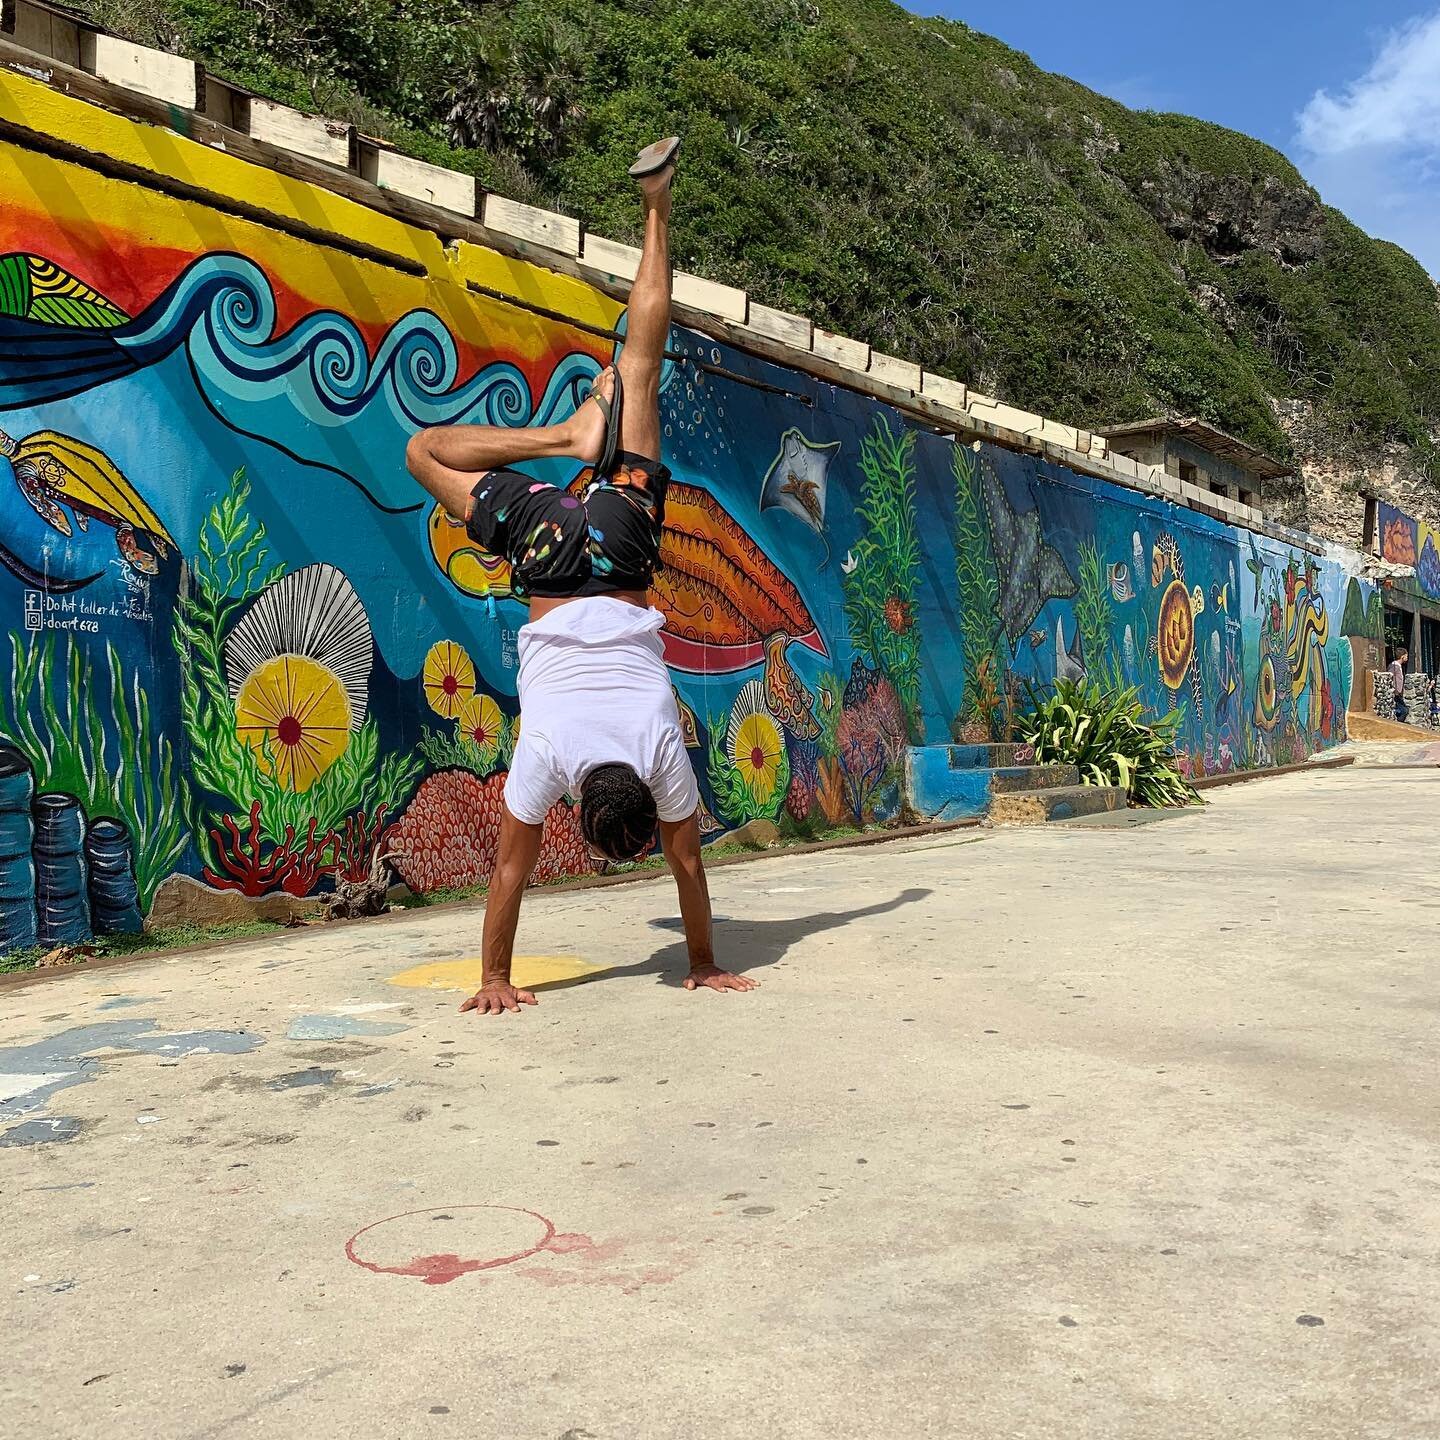 Puerto Rico has some of the coolest murals. The ocean theme is always 💯  Hope everyone is doing great out there! #handstand #yoga #puertorico #isabela #mural #art #painting #fun #exlore #tourism #lululemon #mensyoga #findjoy #bjj #mma #brazilianjiuj